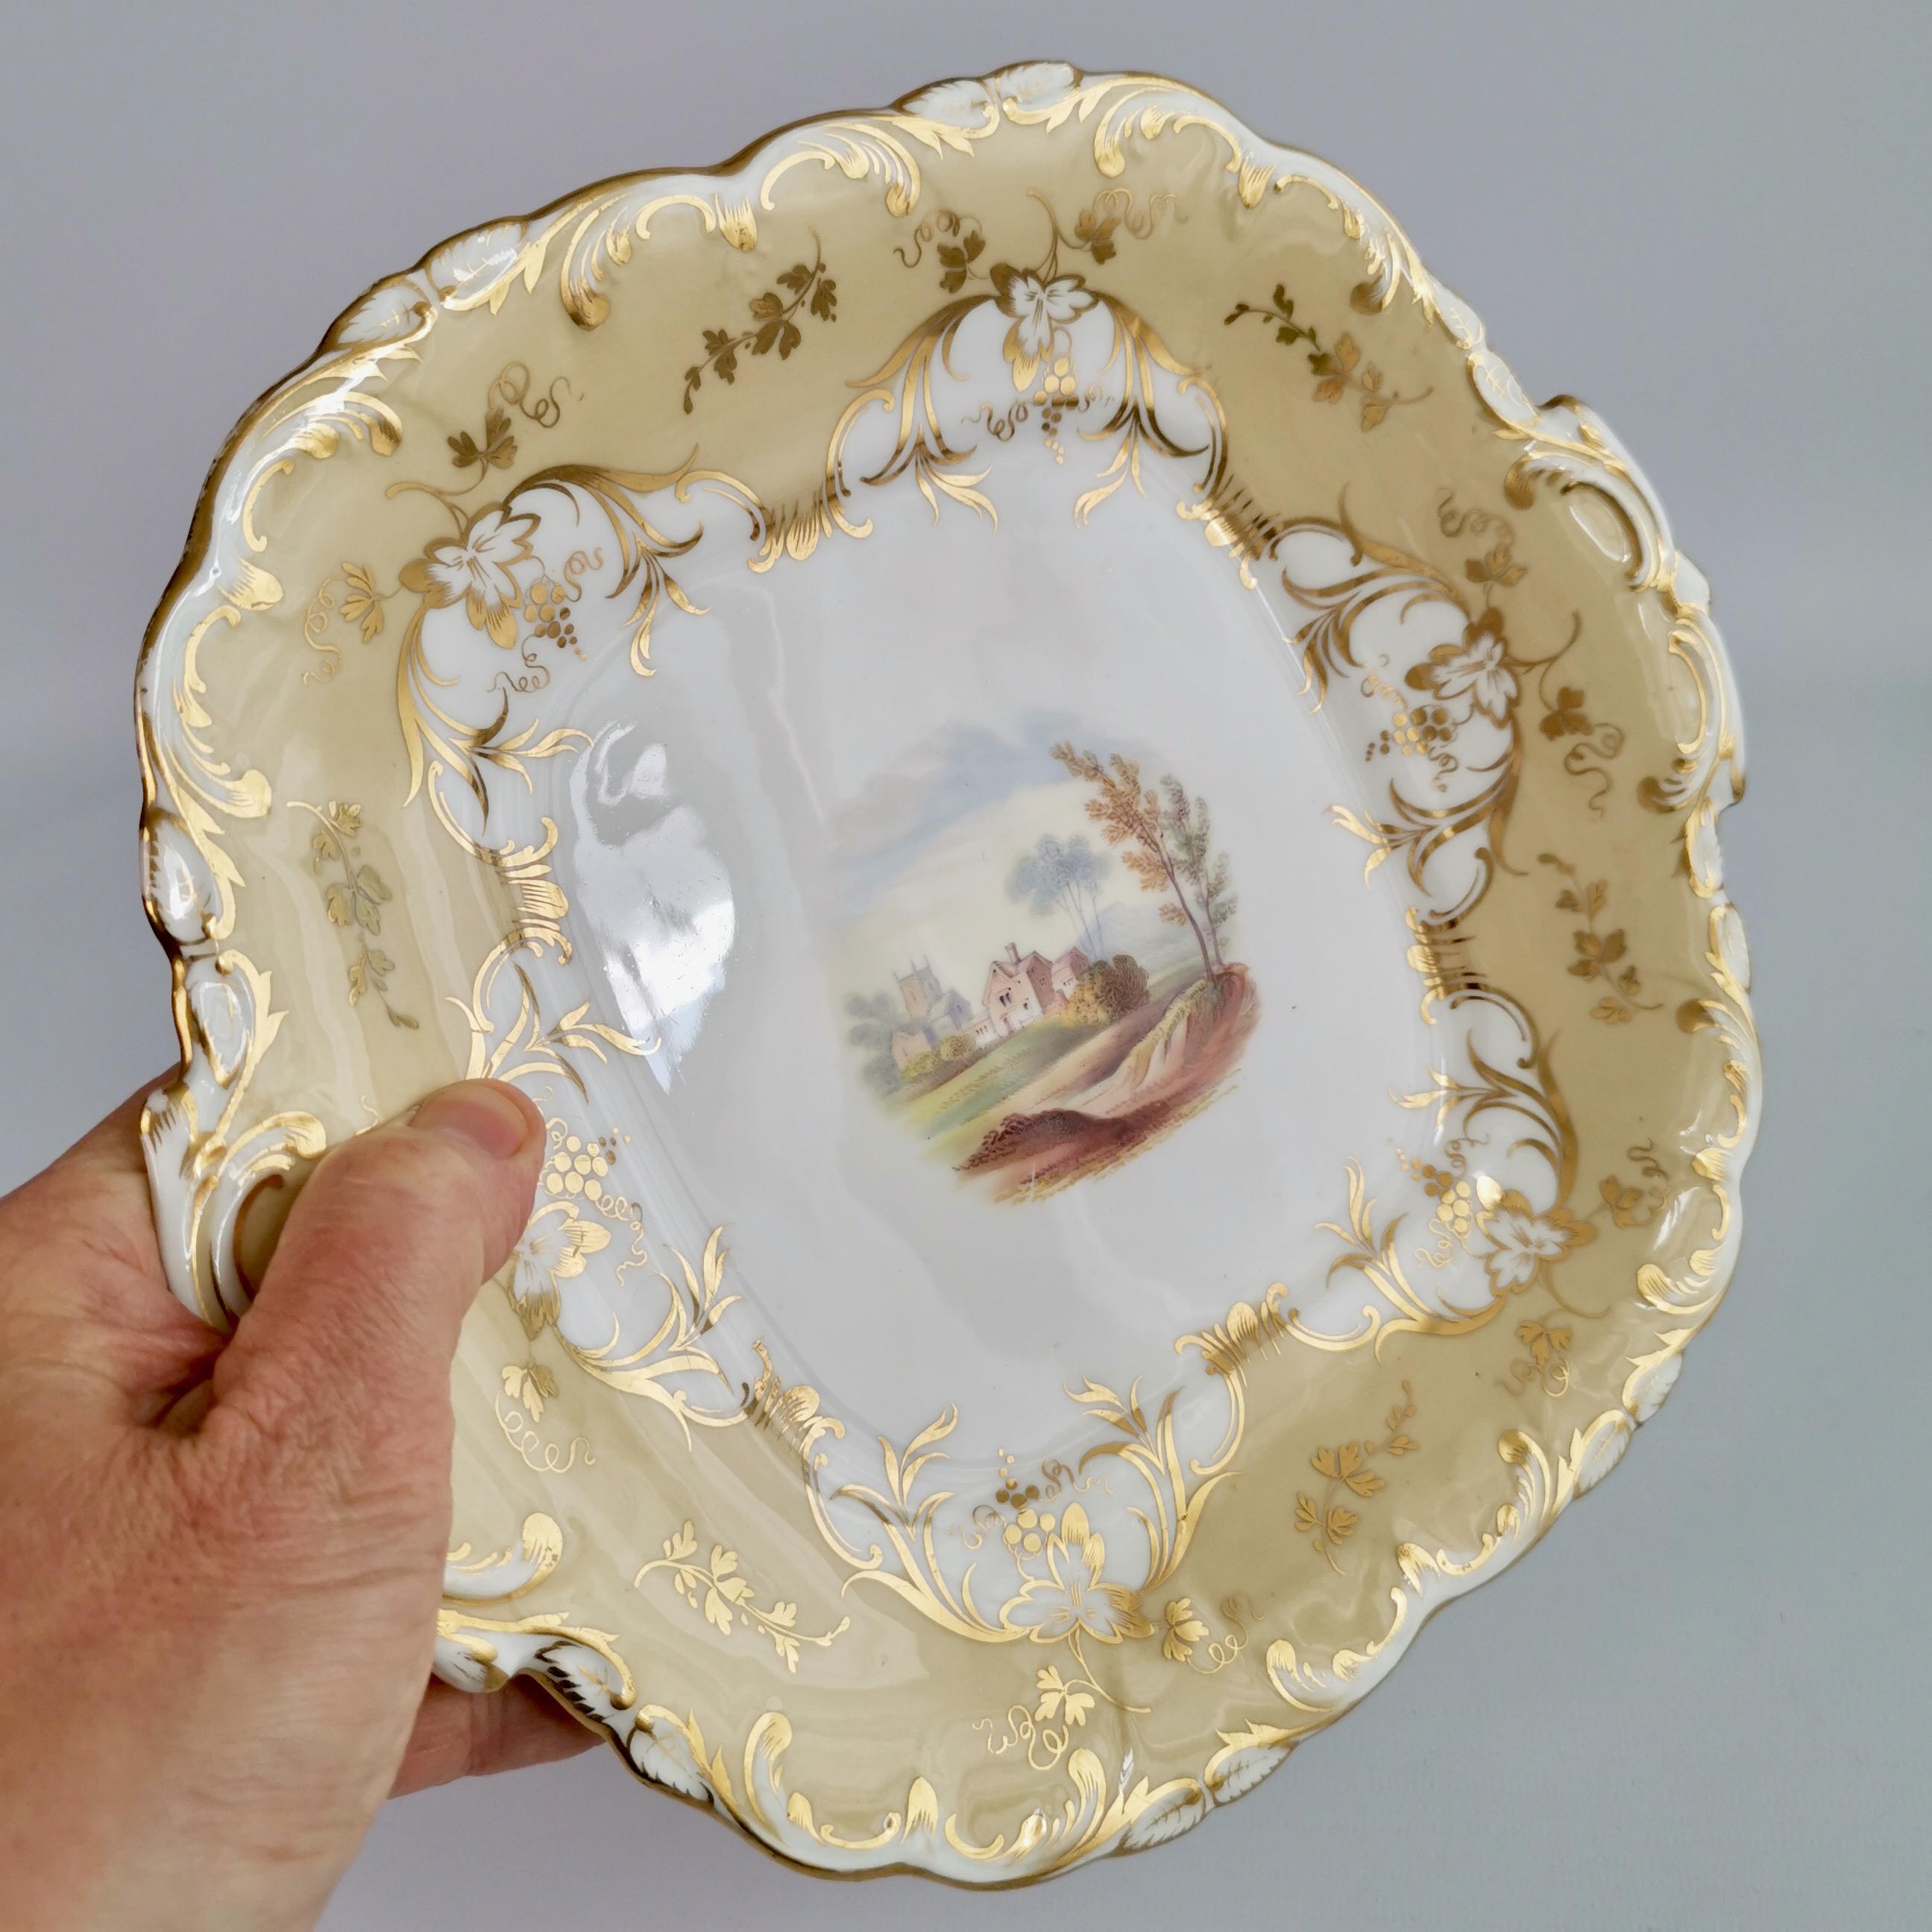 Hand-Painted Coalport Porcelain Cake Plate, Beige with Landscapes, Rococo Revival, ca 1840